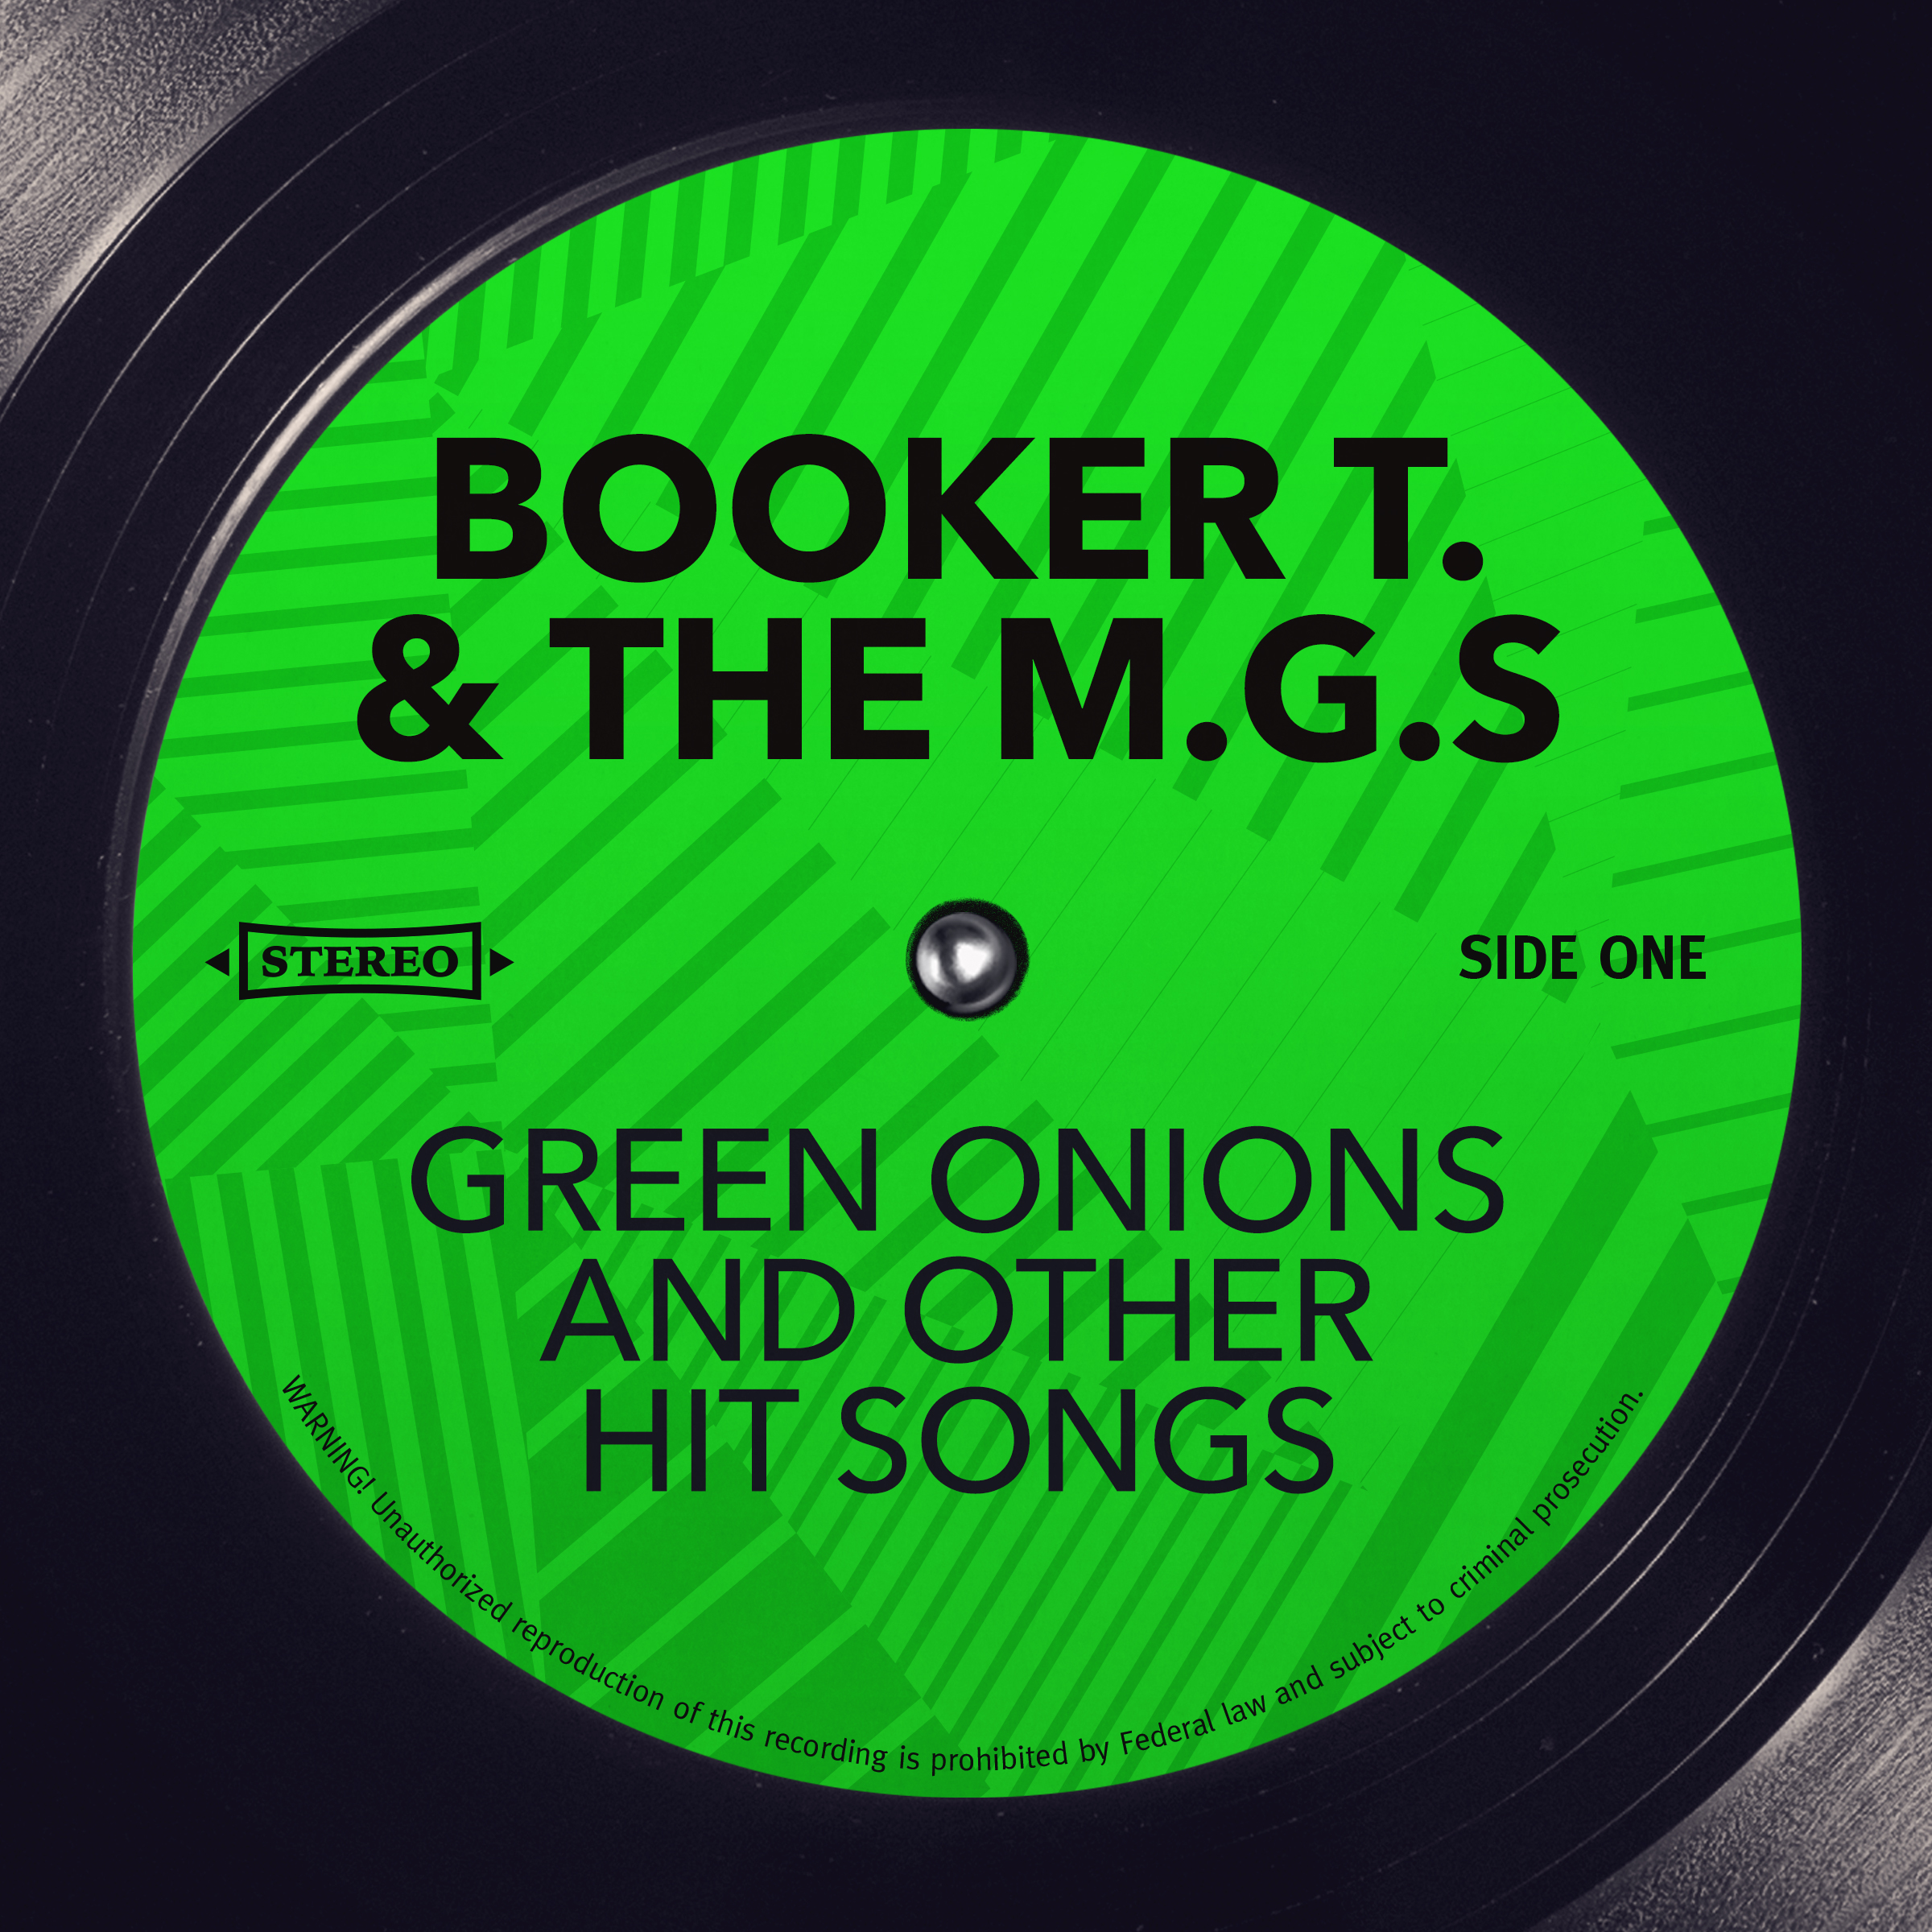 Green Onions and other Hit Songs